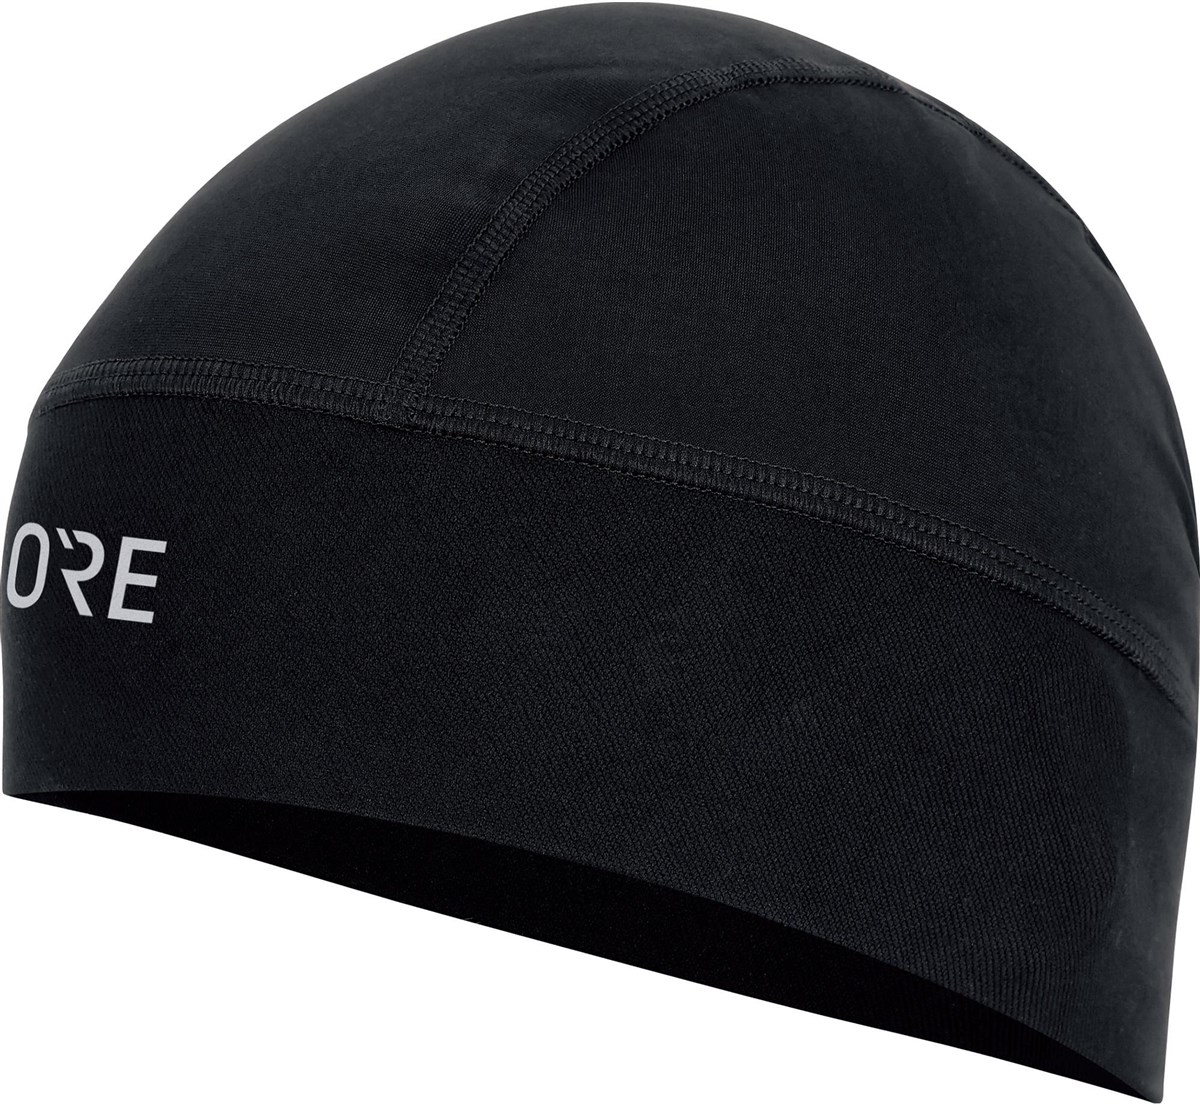 Gore M Beanie product image